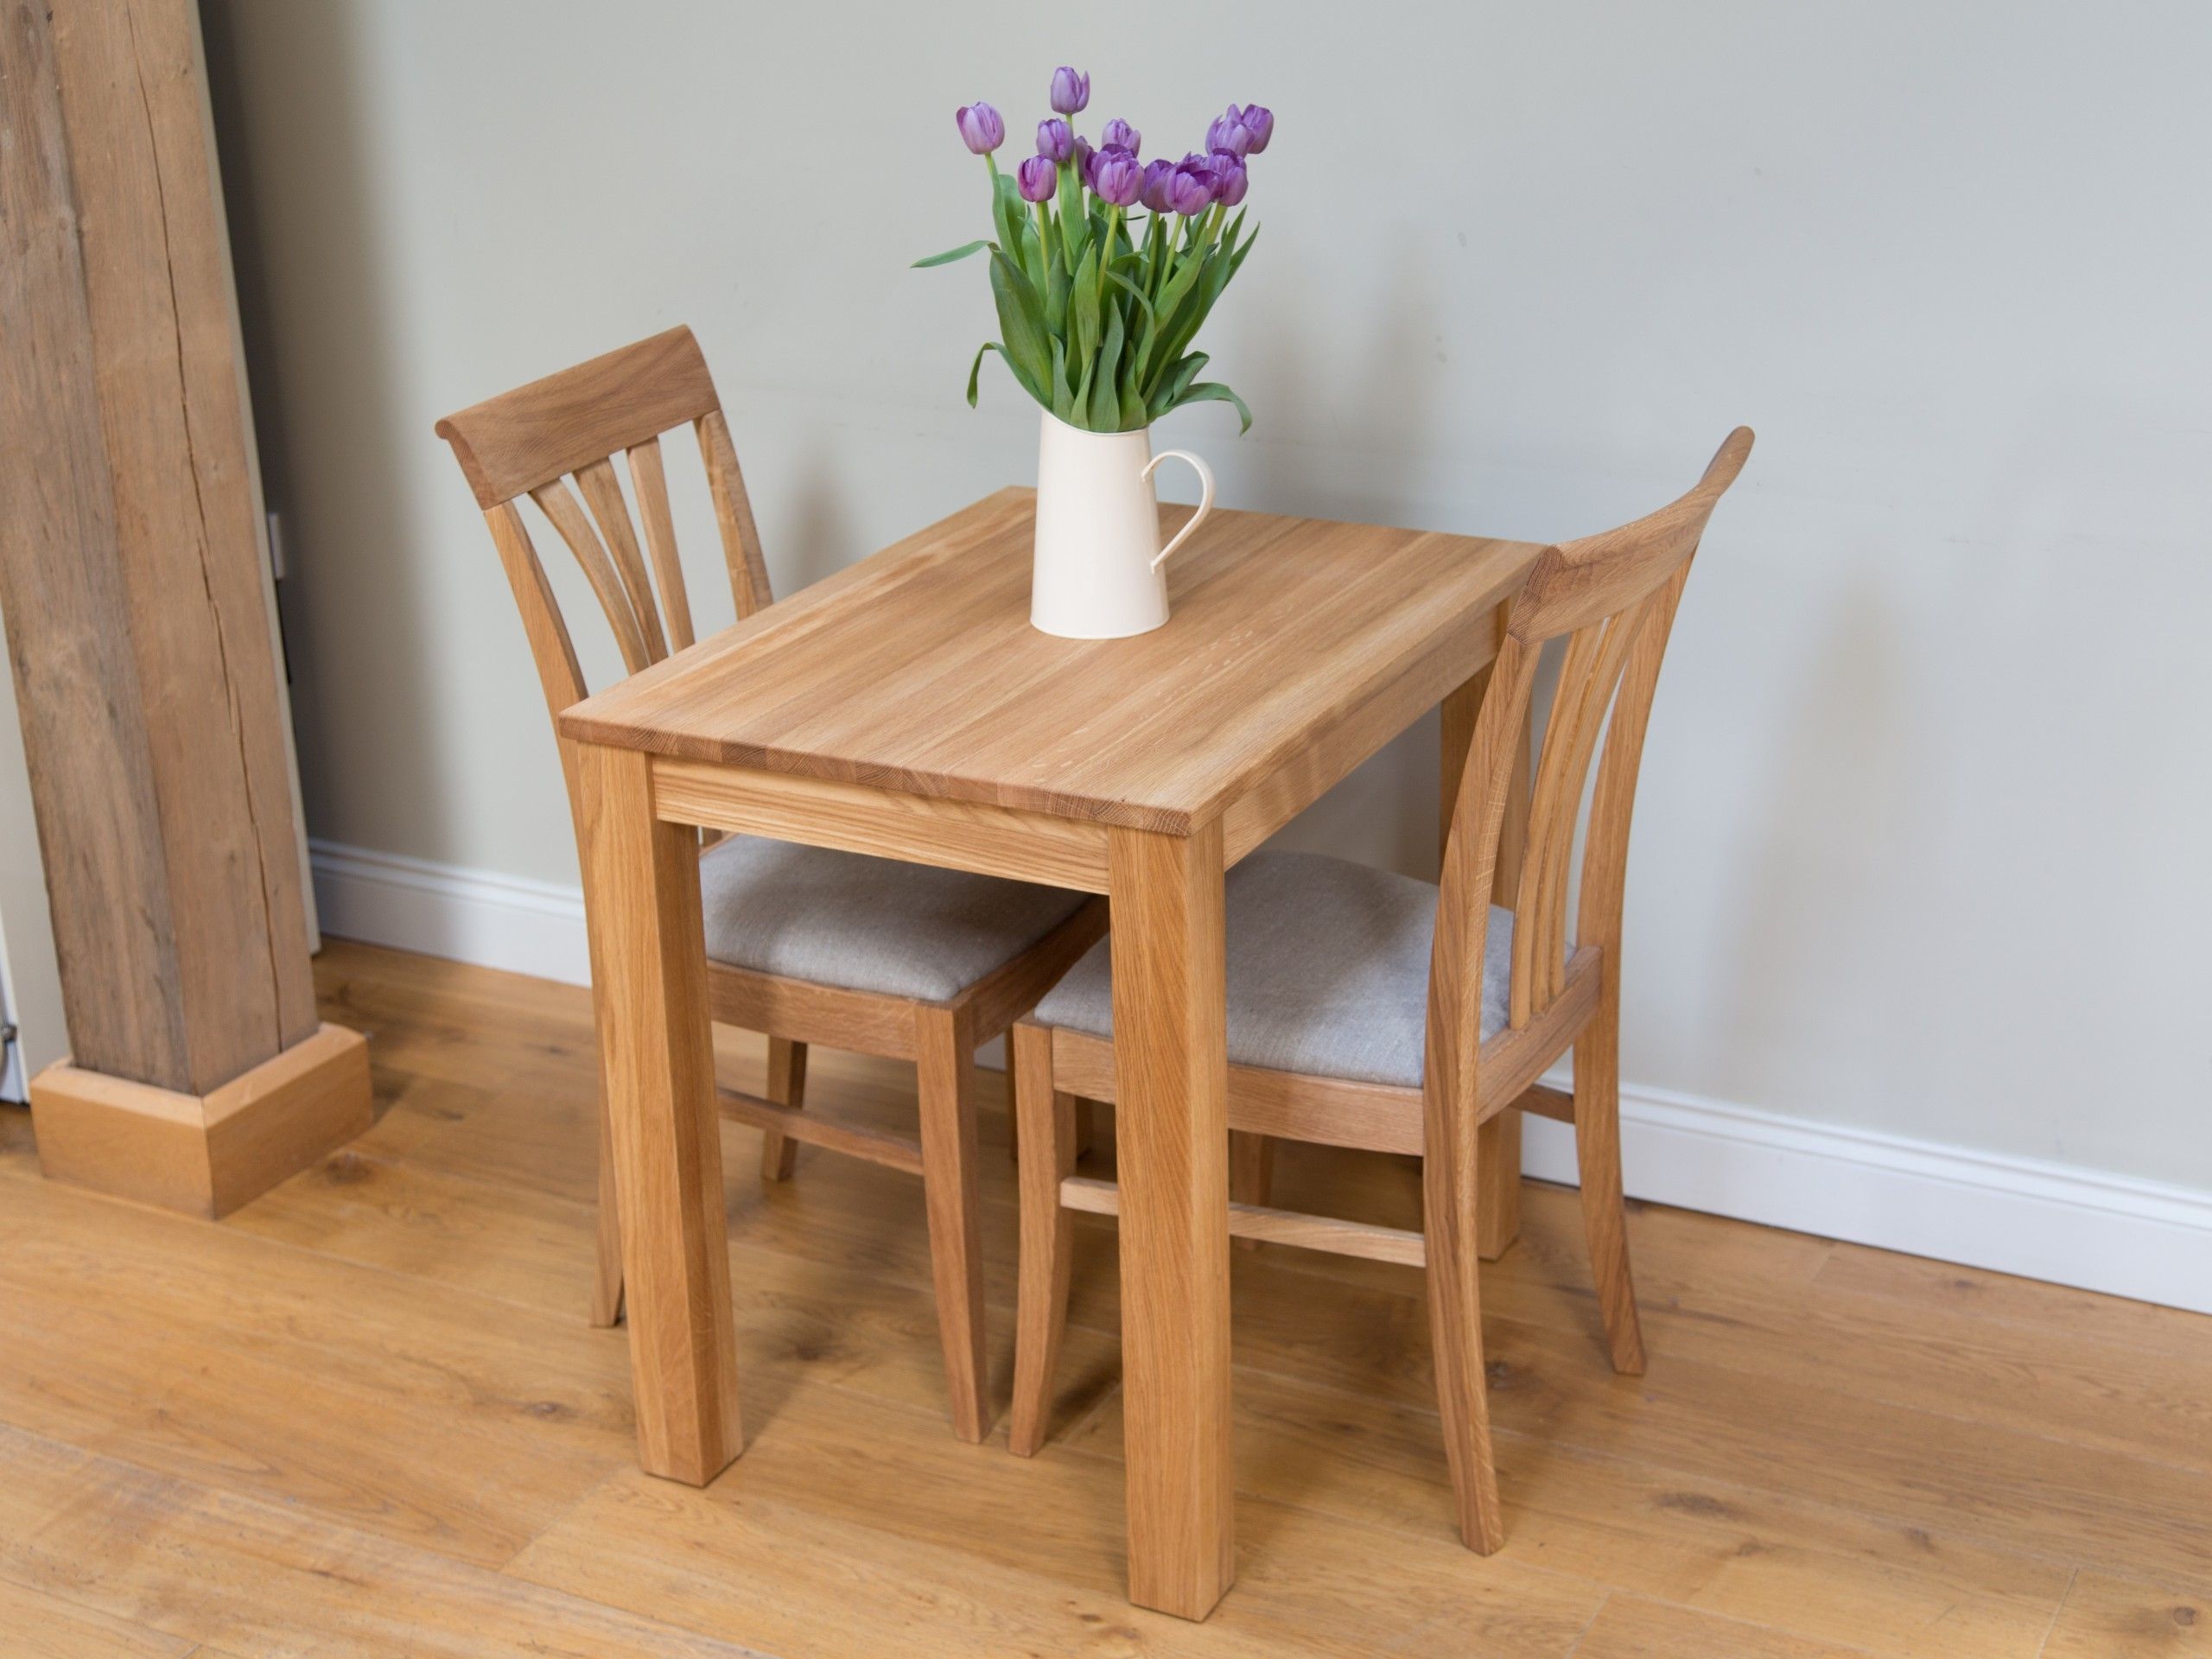 Two Person Dining Table Sets Throughout Famous Oak Kitchen Table Chair Dining Set From Top Furniture, At A Table (View 12 of 25)